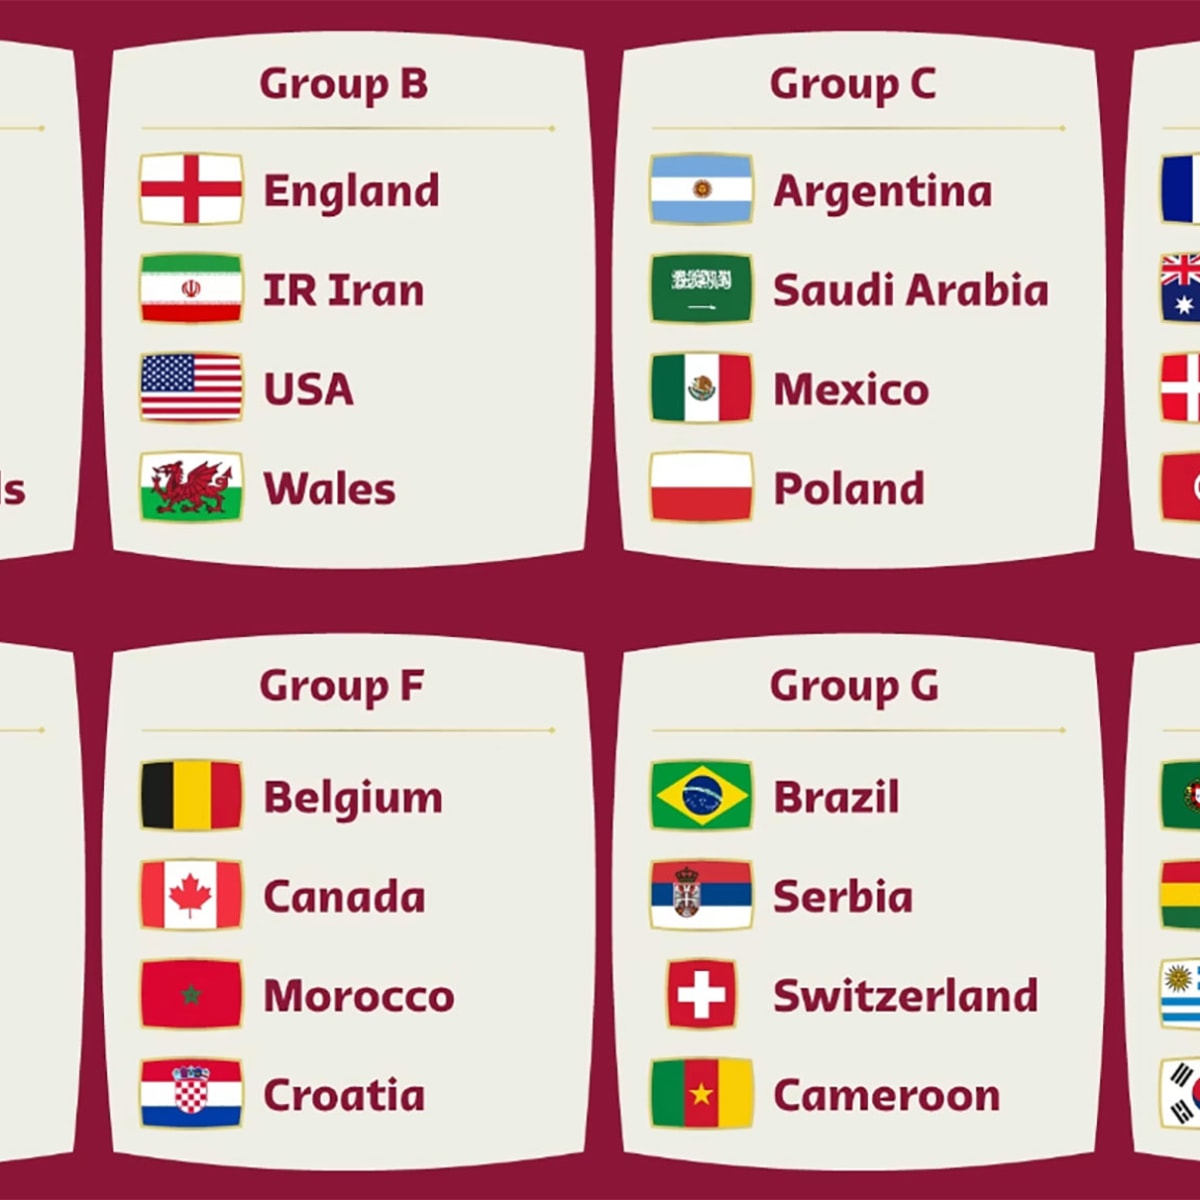 FIFA World Cup Group Tiebreaker Rules Explained